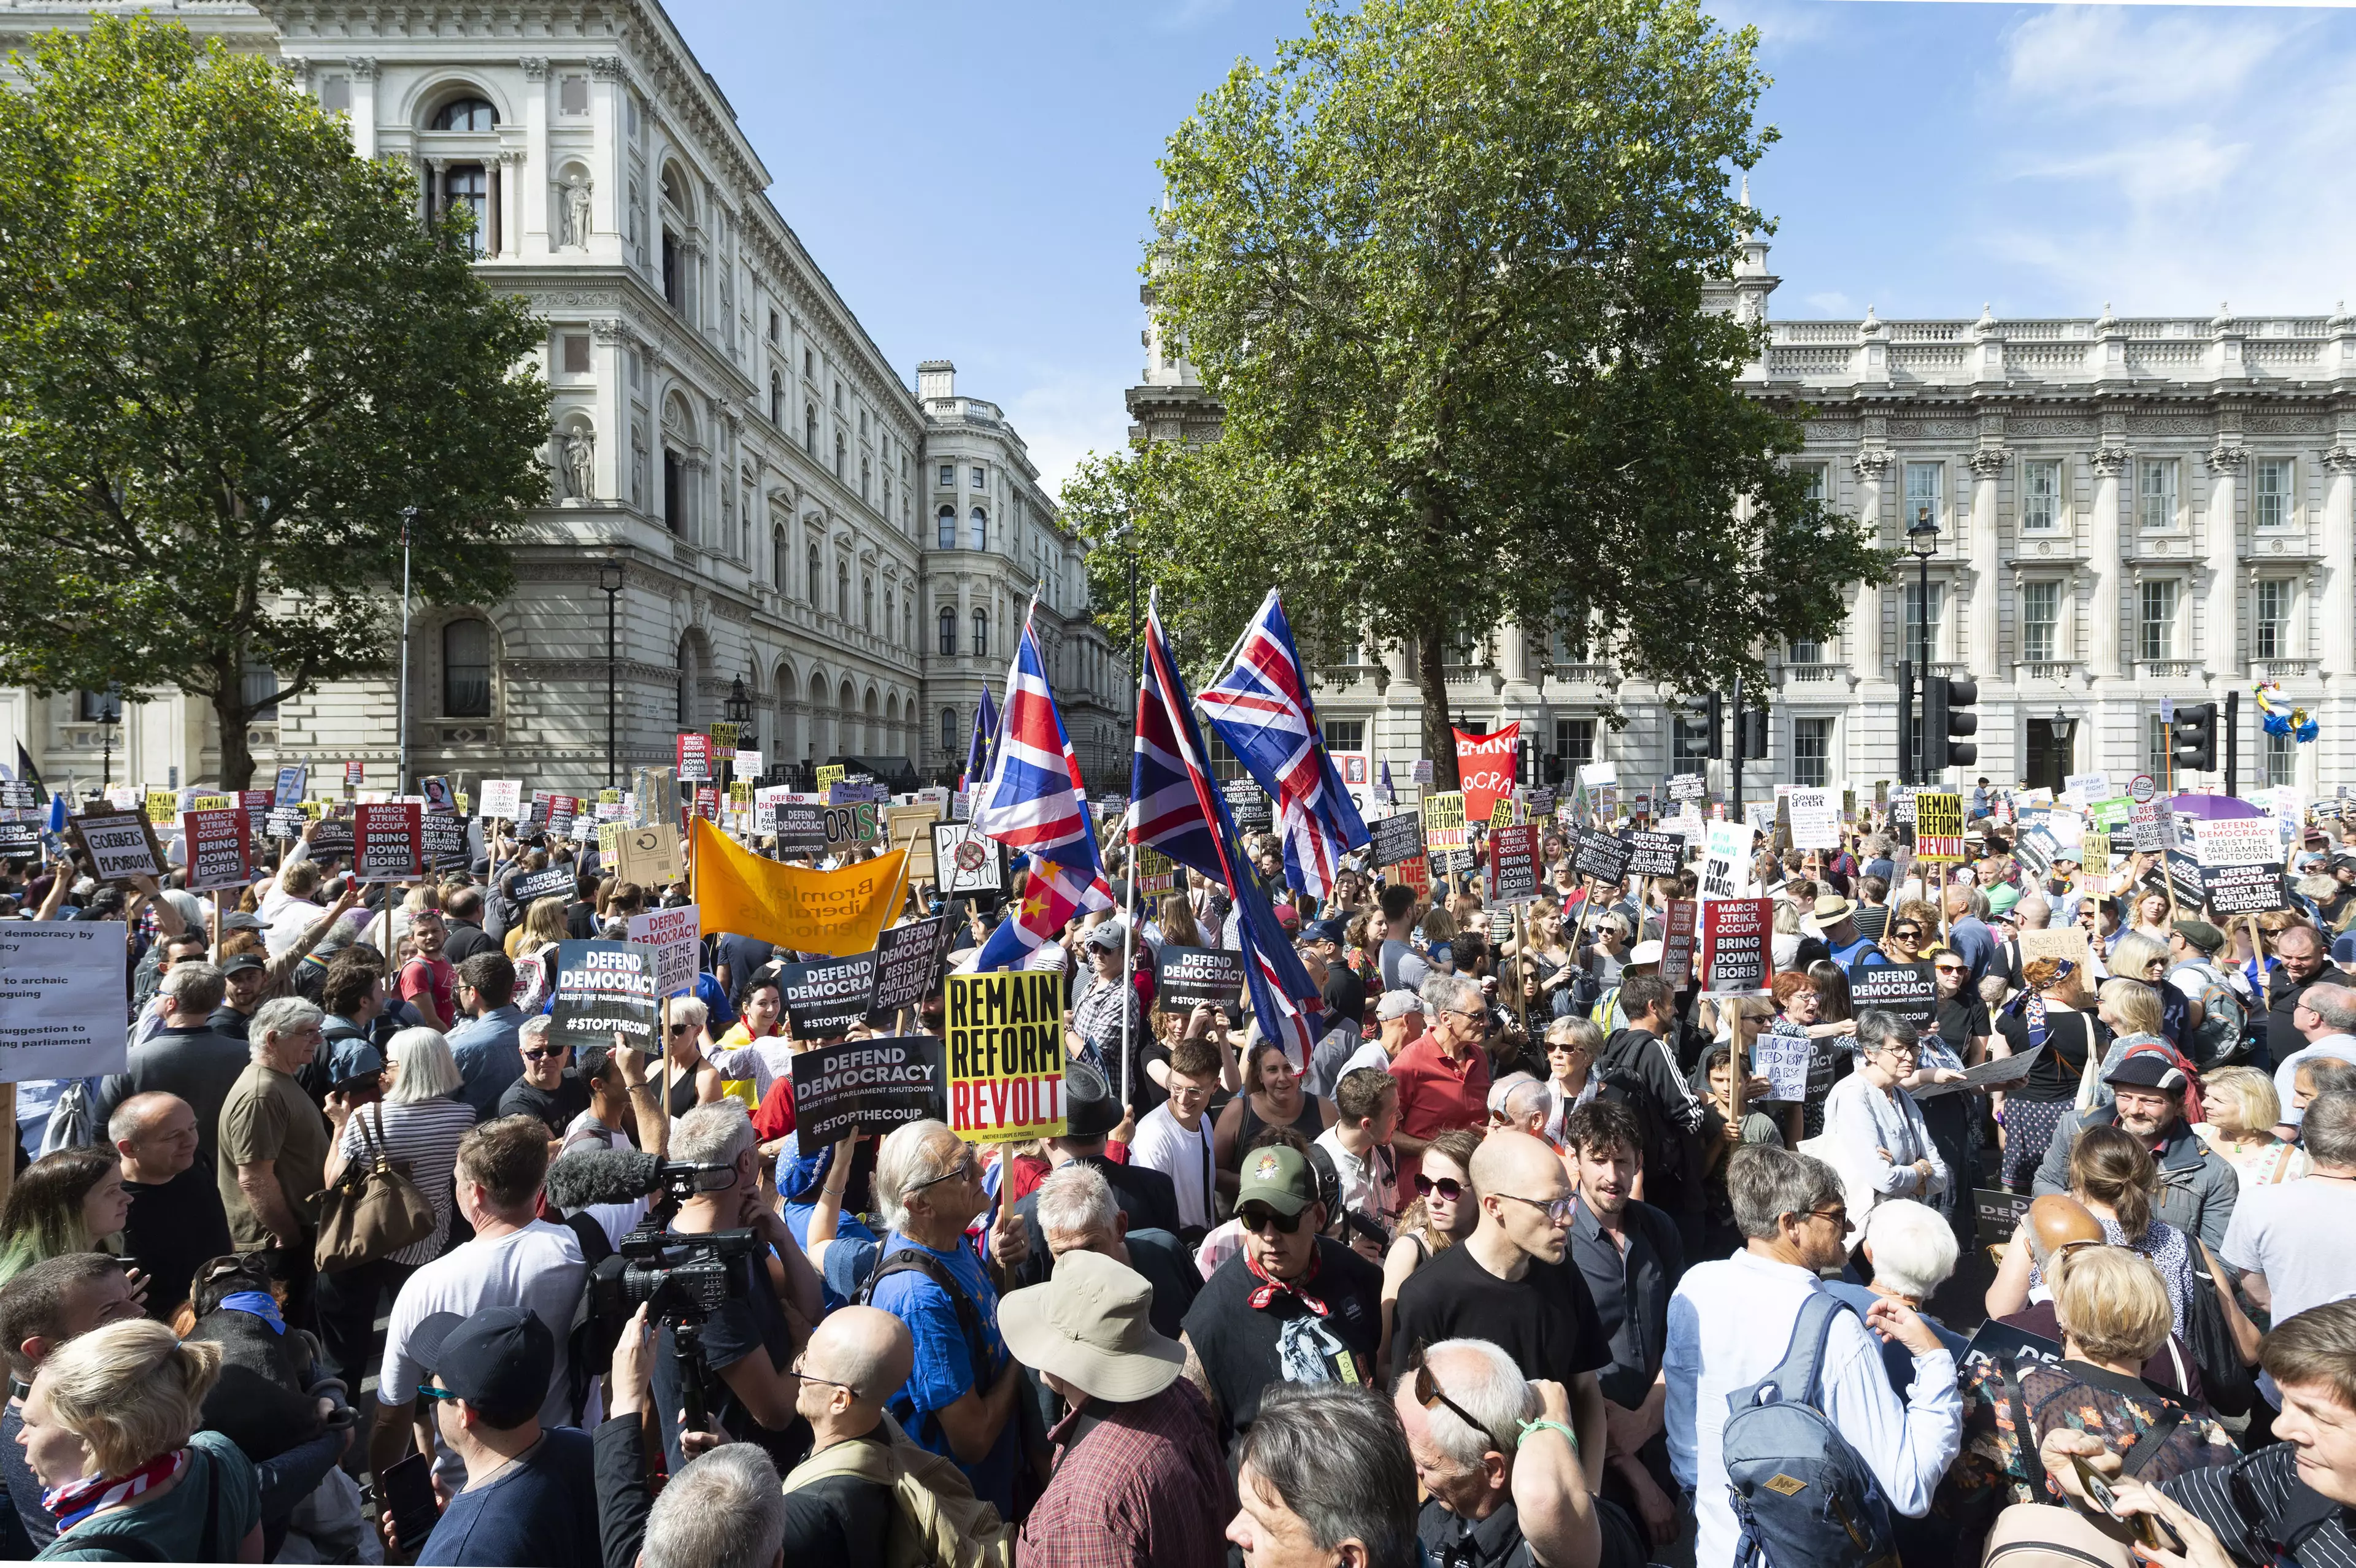 Protesters took to the streets to campaign against Johnson's decision to suspend Parliament.